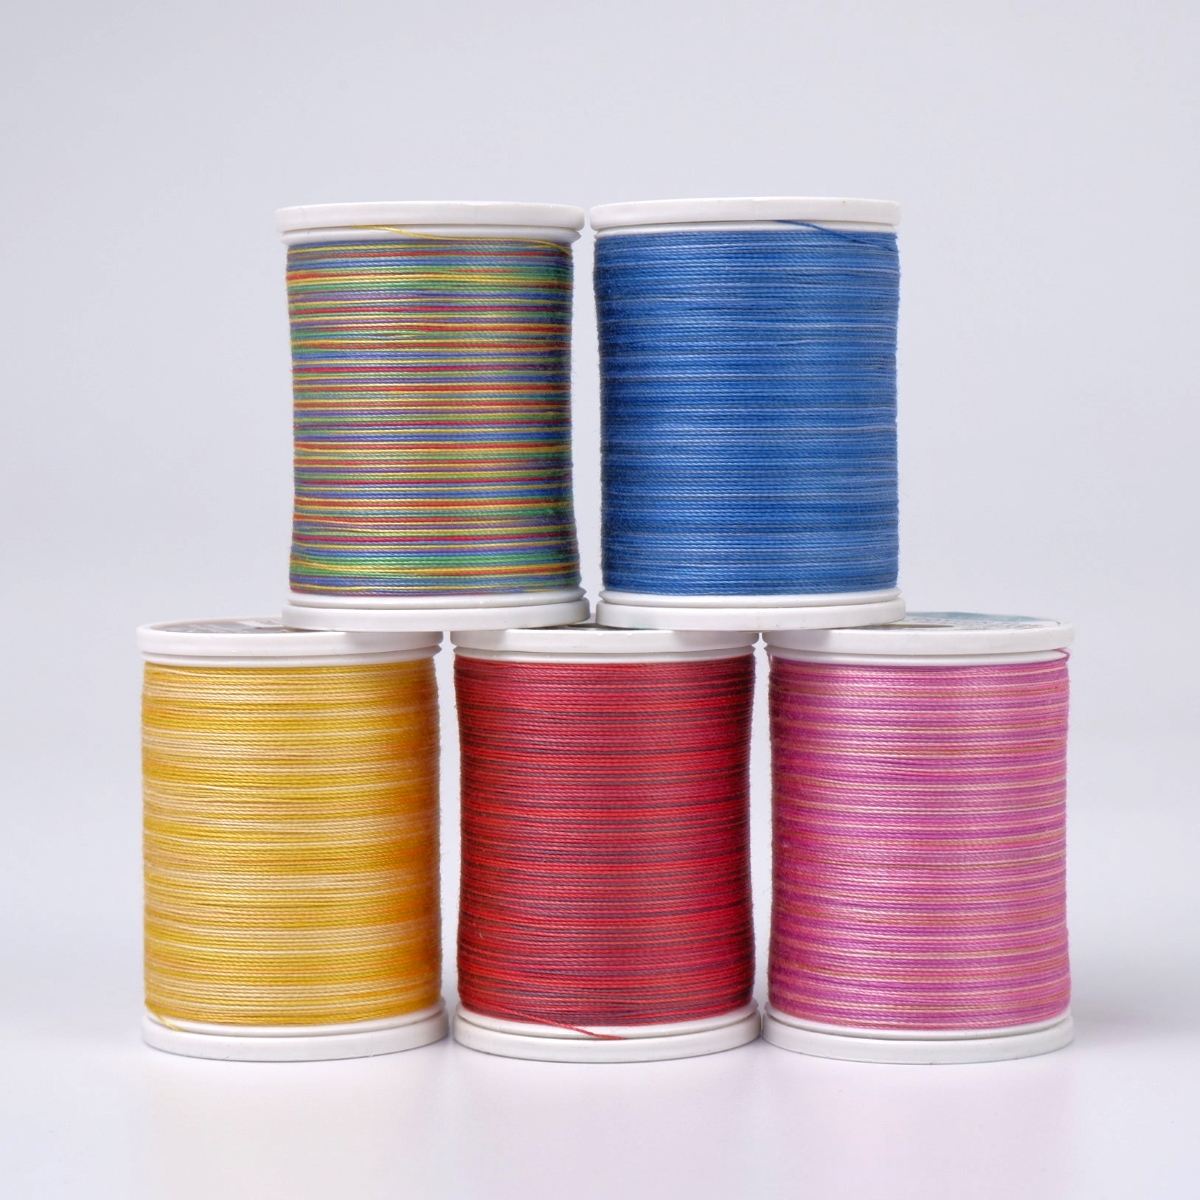 SULKY COTTON 30 - BESTSELLER
MULTICOLOR (5x 450m King Spools)